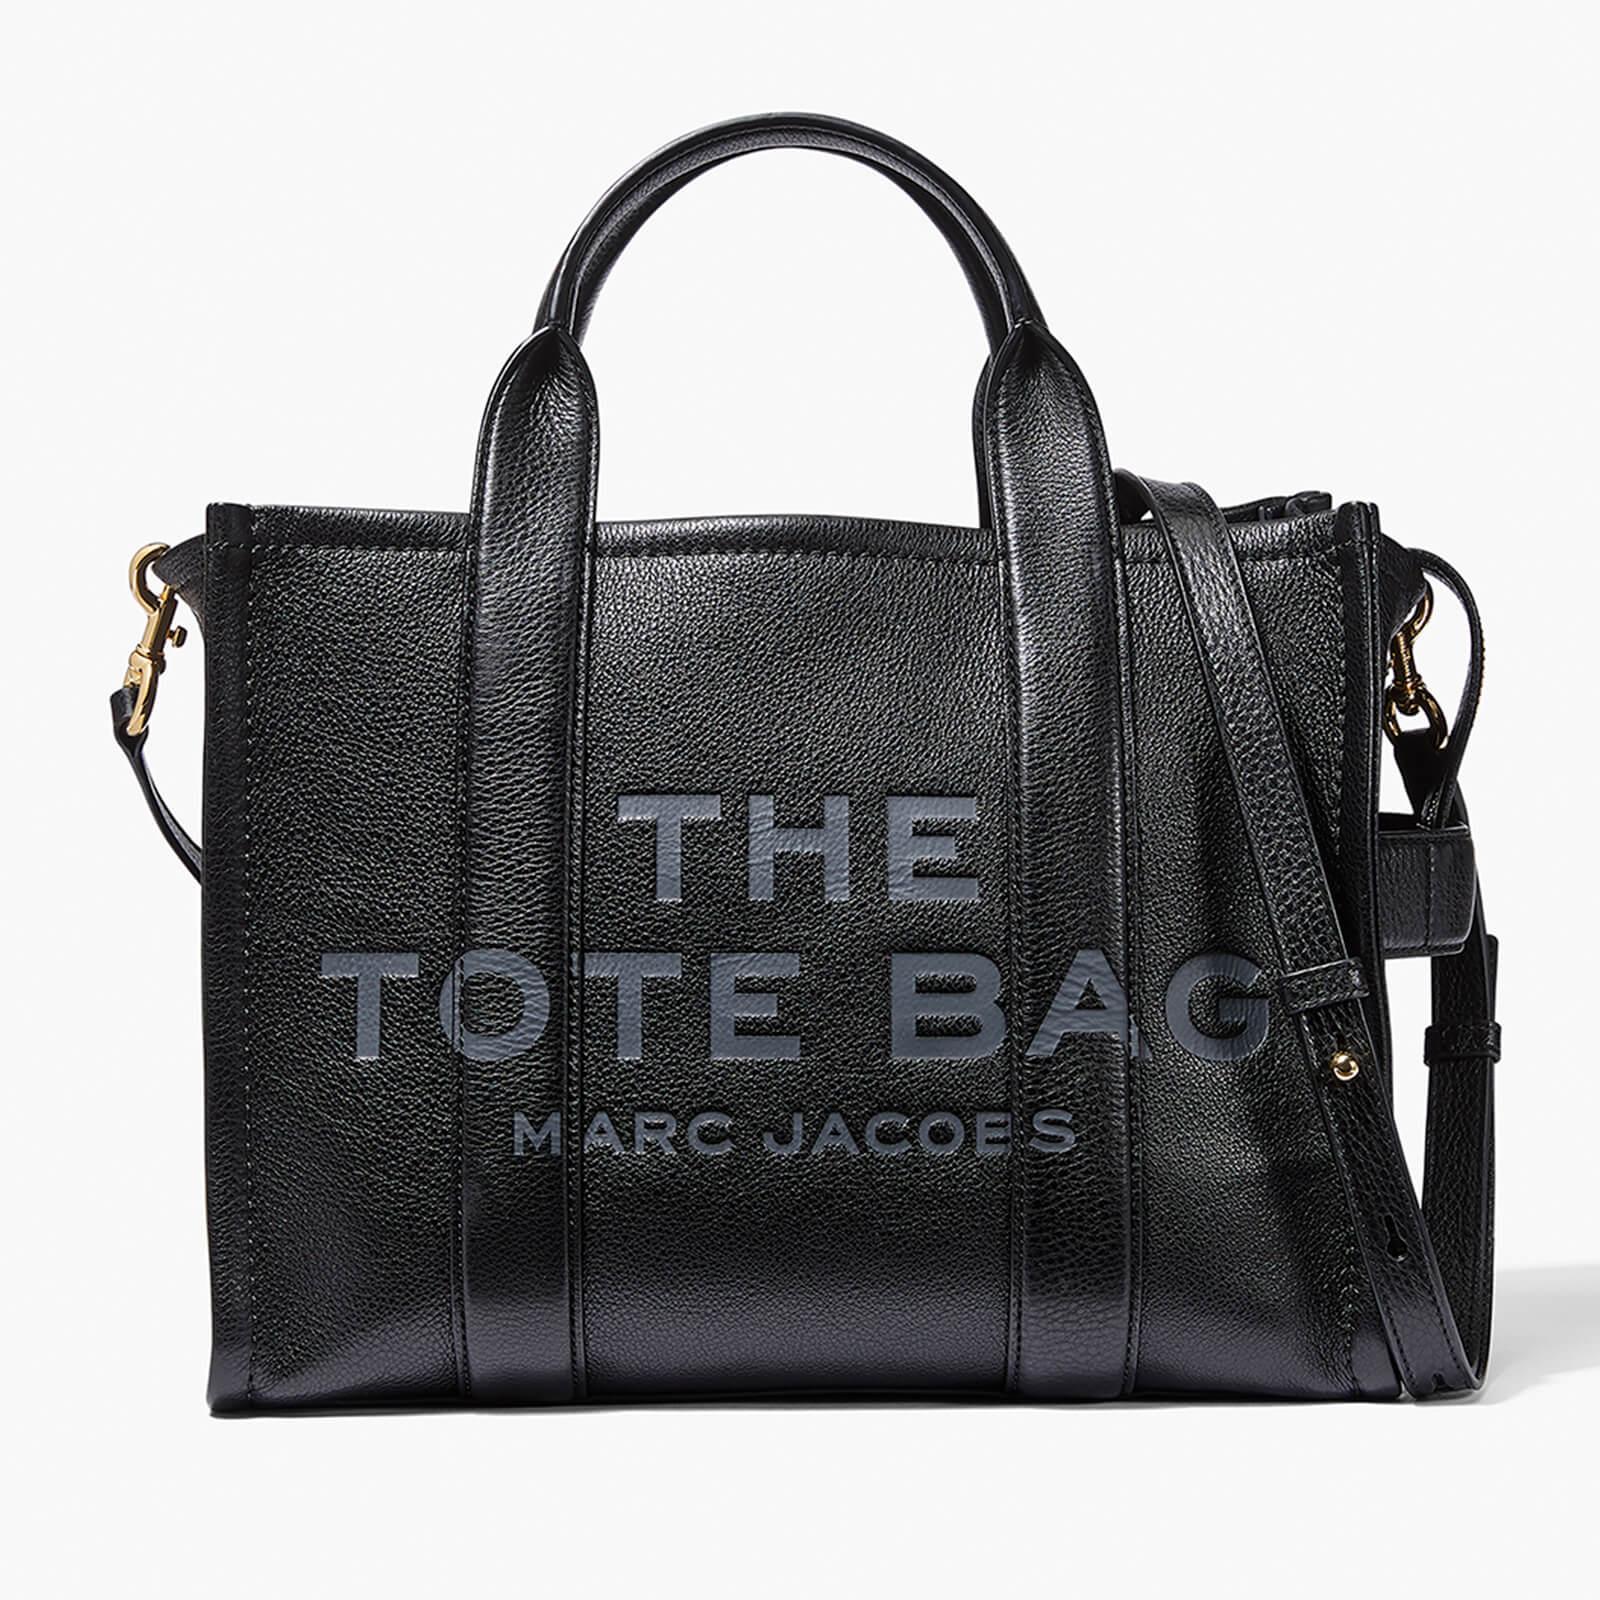 Marc Jacobs Leather Medium Tote in Black